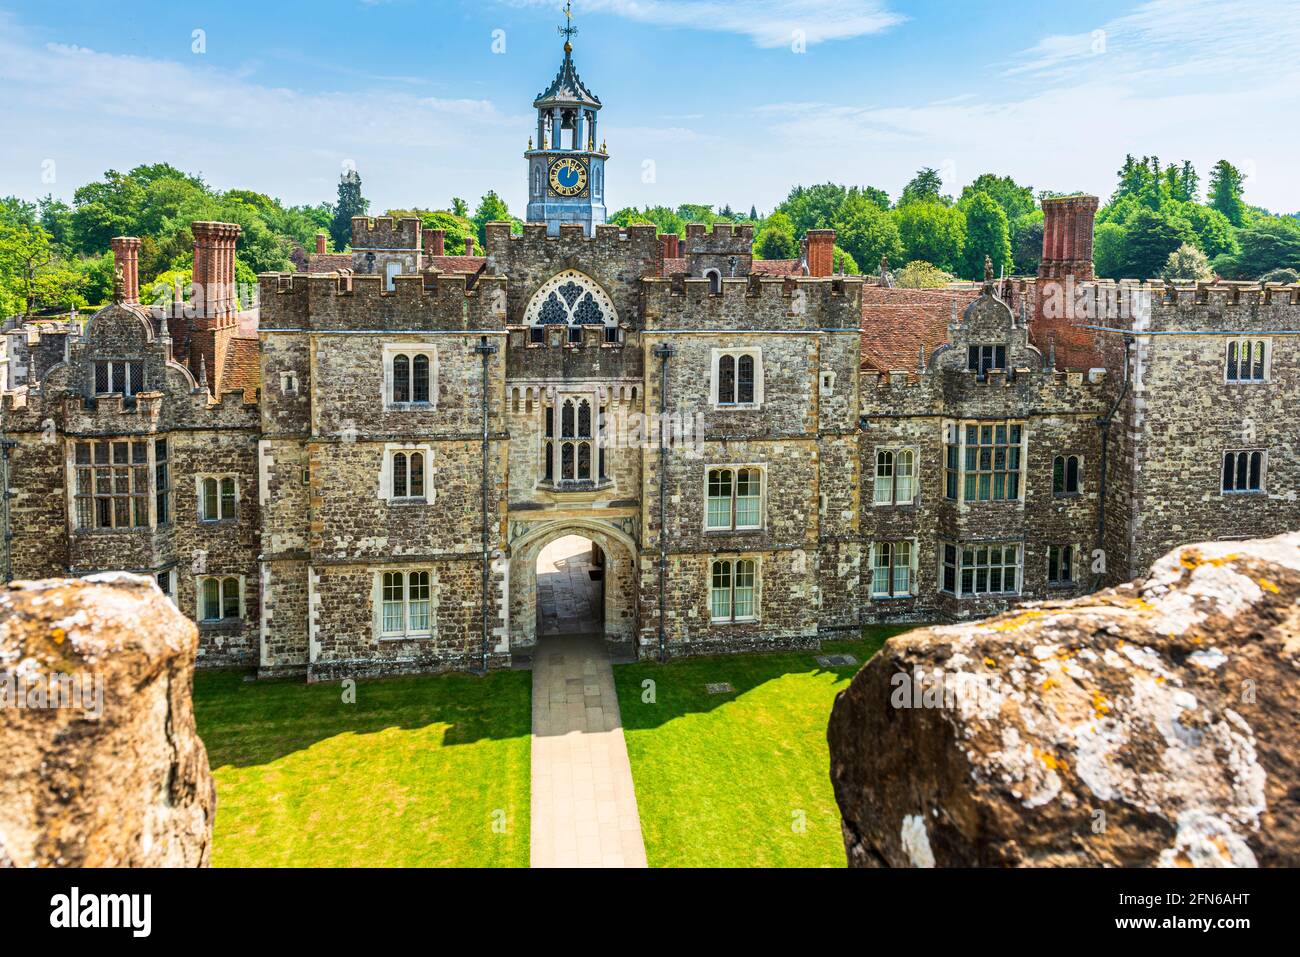 The entrance to Knole house from above the gatehouse. Stock Photo